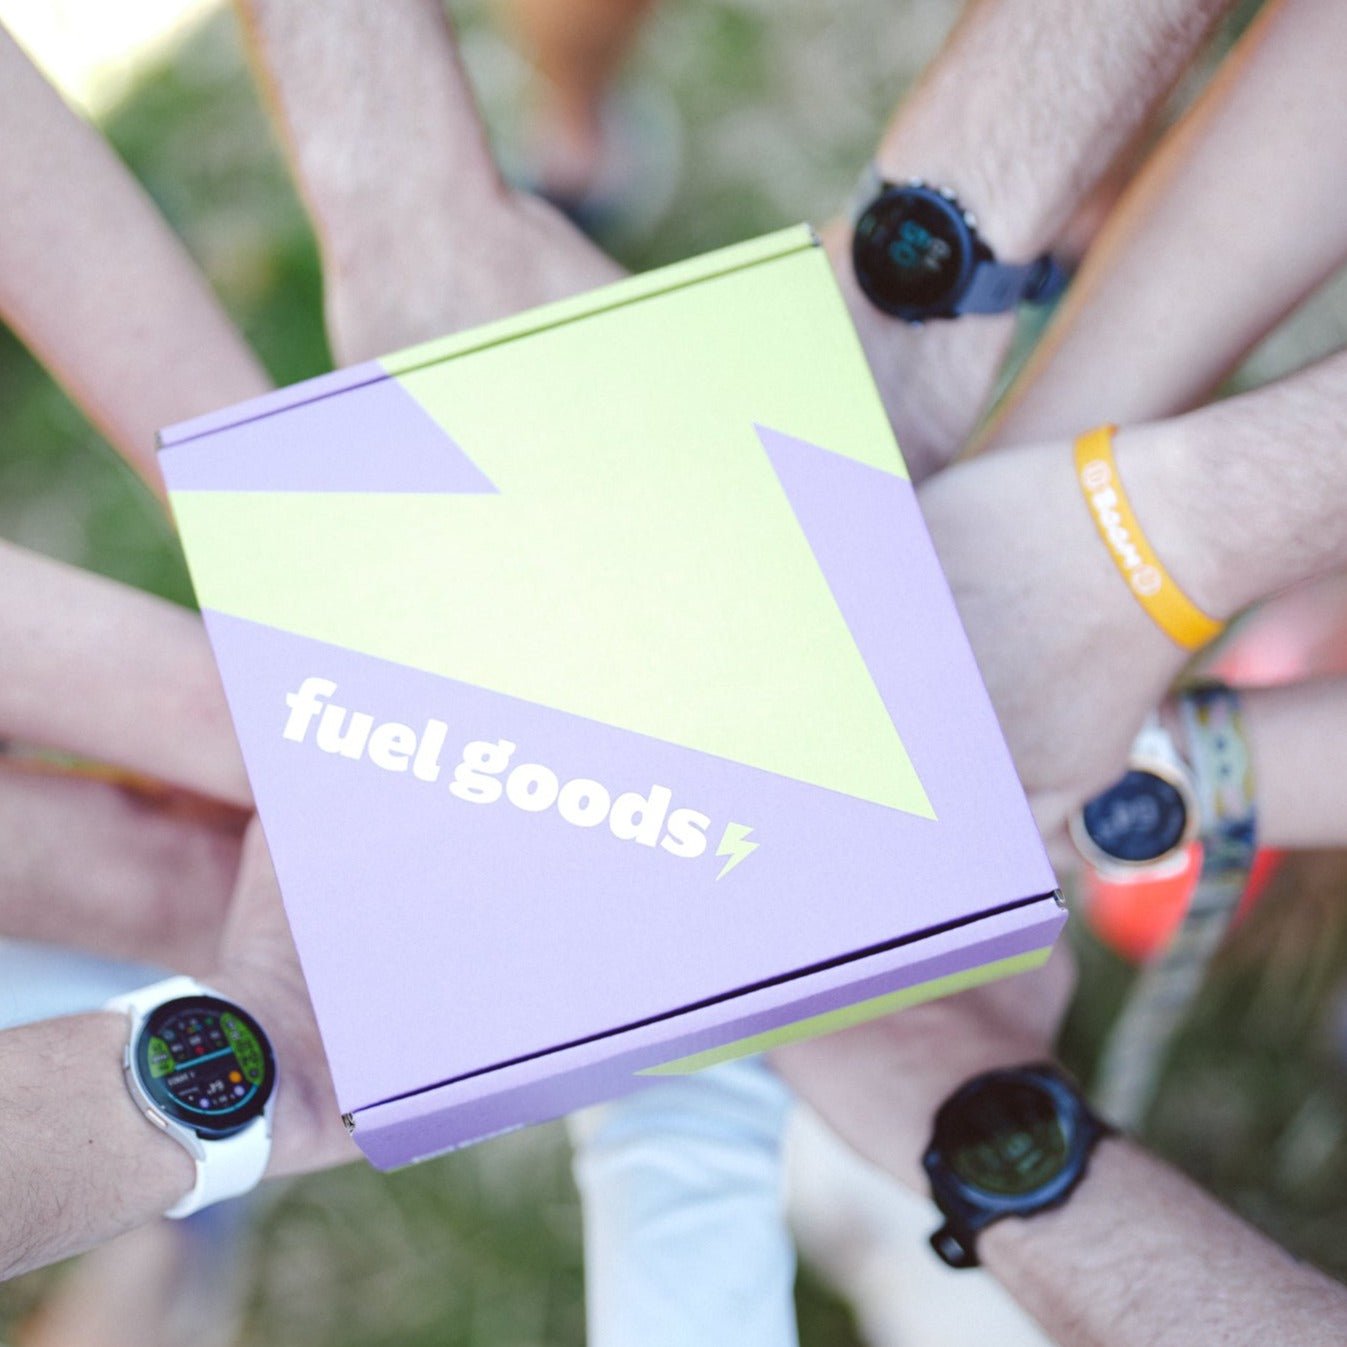 The RunnerBox® Gift Subscription - Fuel Goods